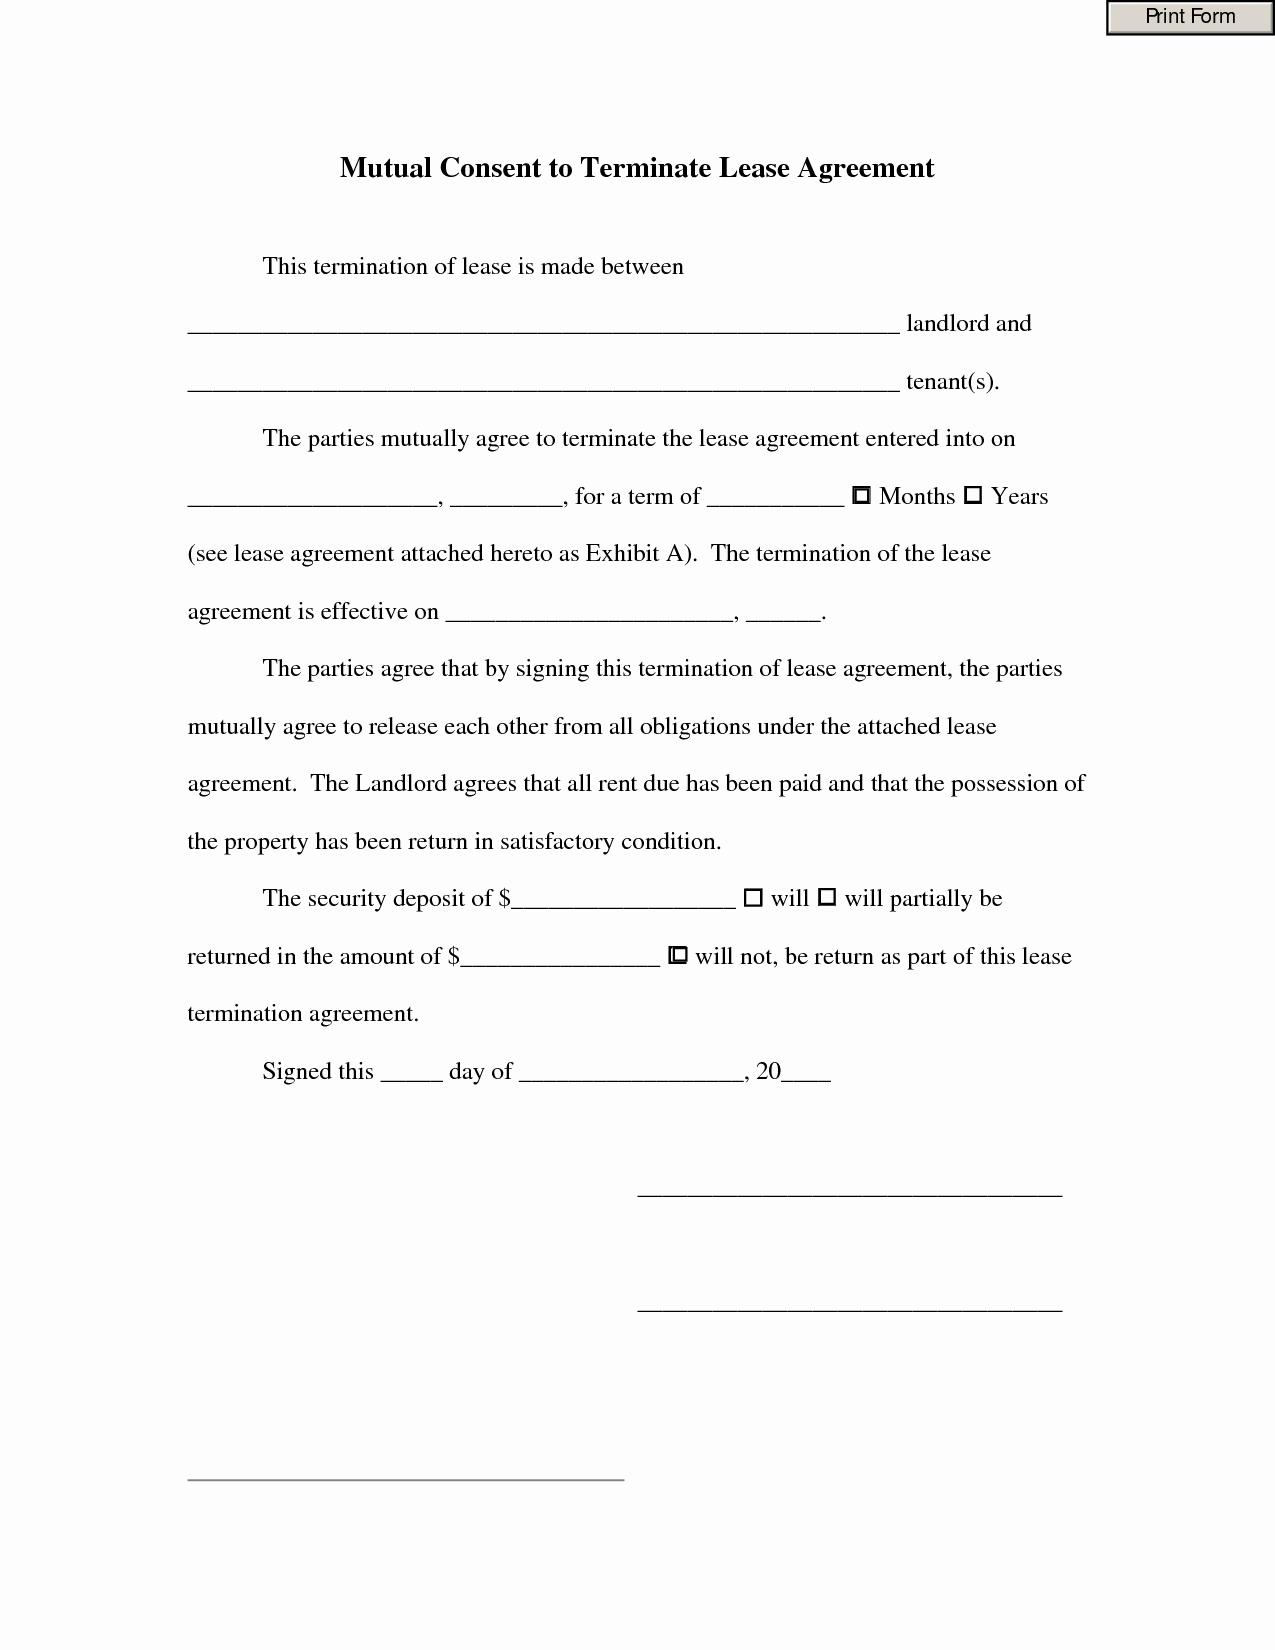 Lease Termination Agreement Template Free Inspirational Mutual Consent to Terminate Lease Agreement by Fdh56iuoui